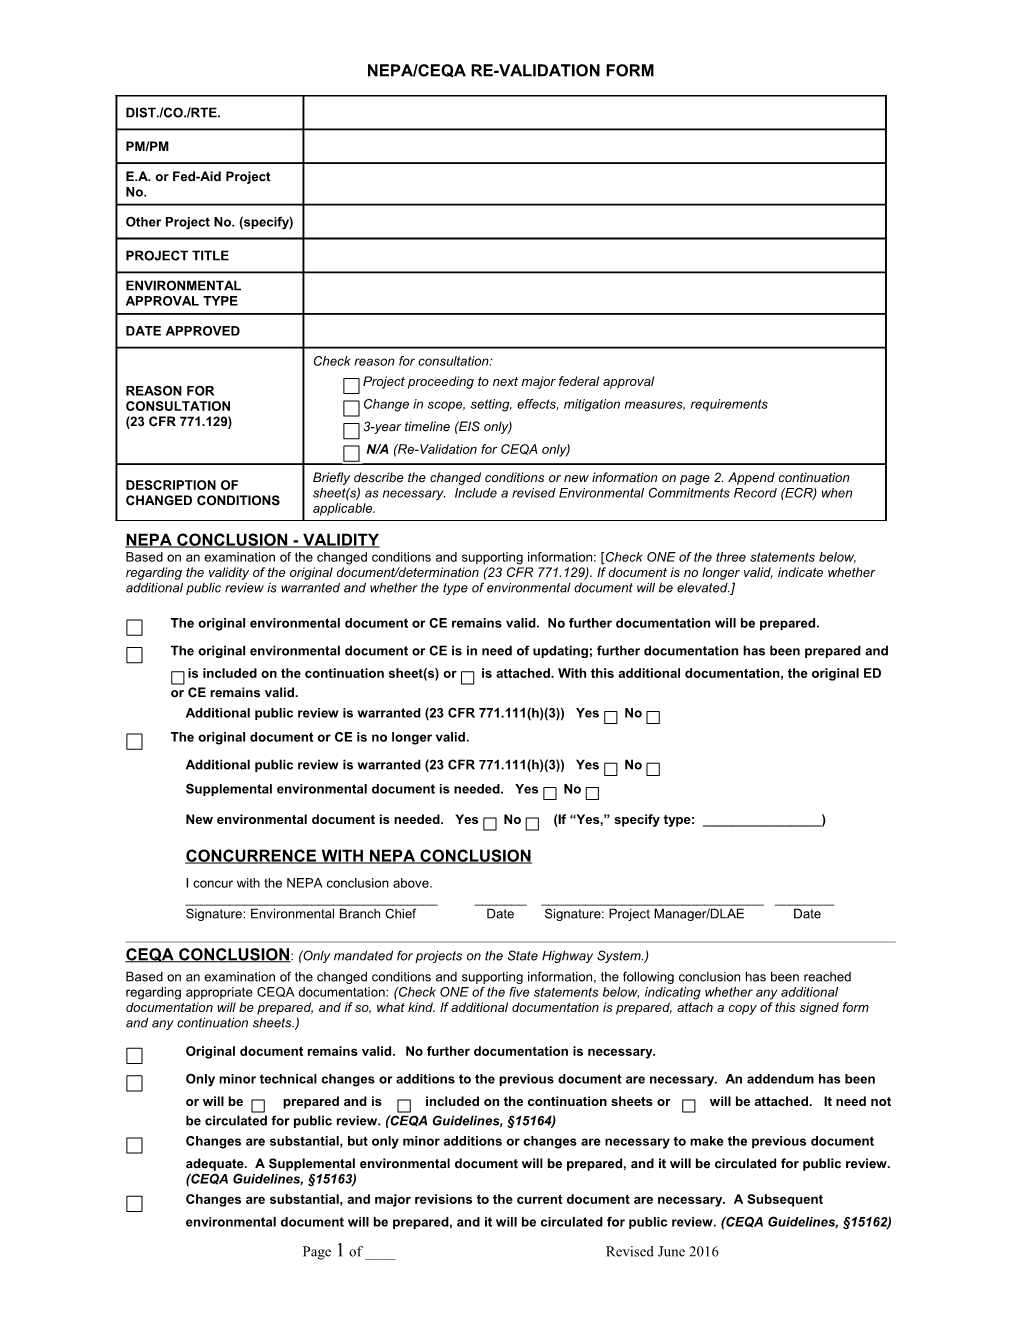 Proposed Categorical Exemption/Exclusion and Programmatic Categorical Exclusion Form